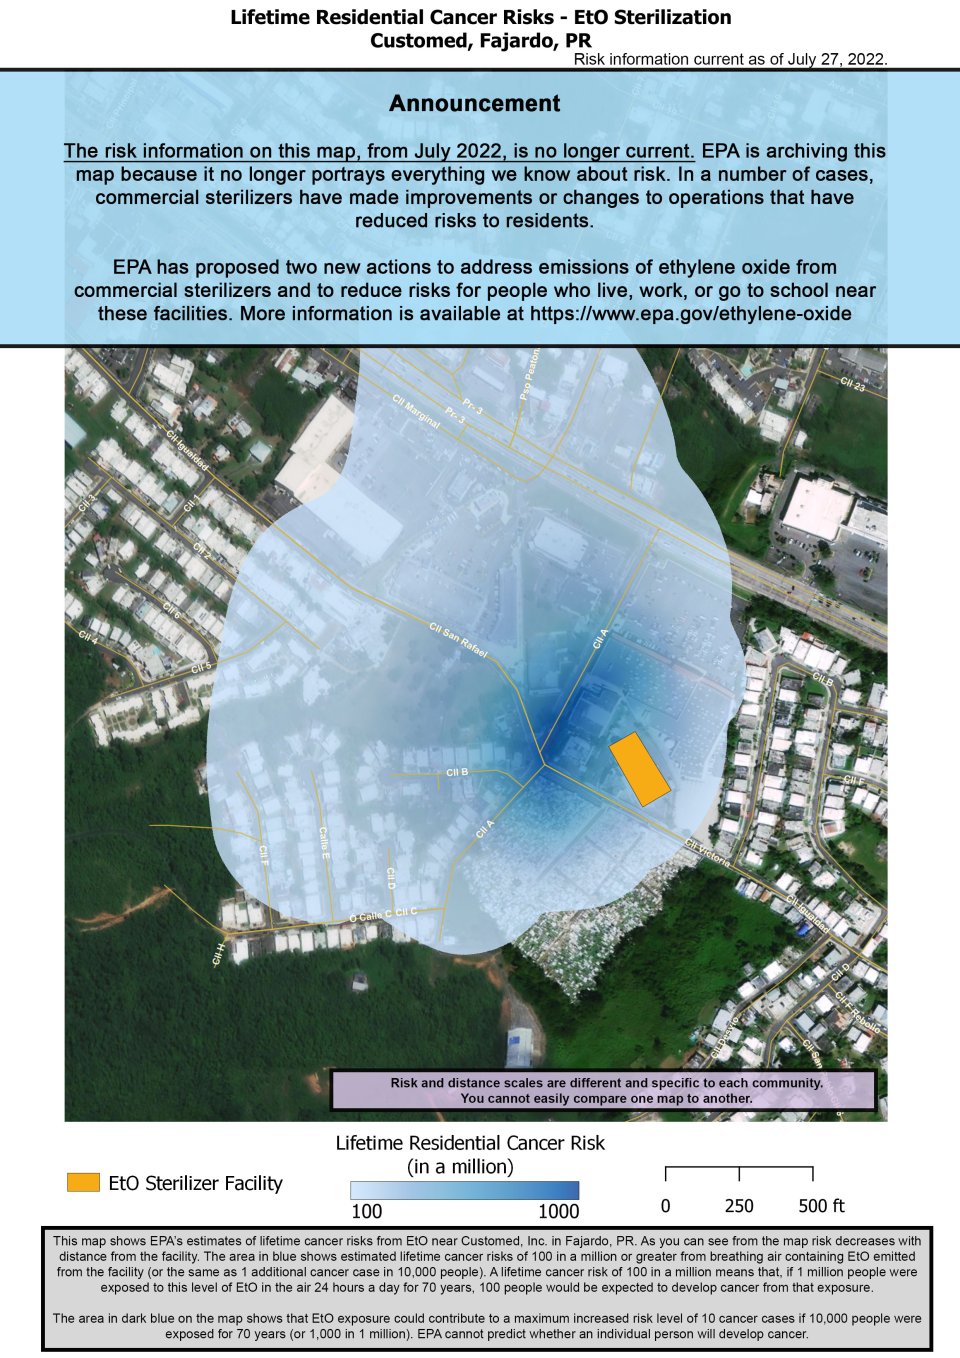 This map shows EPA’s estimate of lifetime cancer risks from breathing ethylene oxide near Customed, Inc. located at Carretera Igualdad #7 in Fajardo, PR.  Estimated cancer risk decreases with distance from the facility.  Nearest the facility, the estimated lifetime cancer risk is 1,000 in a million. This drops to 100 in a million and extends near Fajardo Market Square to the north, Ralph’s Food Warehouse Fajardo to the east, Monte Vista Residential Development to the northwest. 